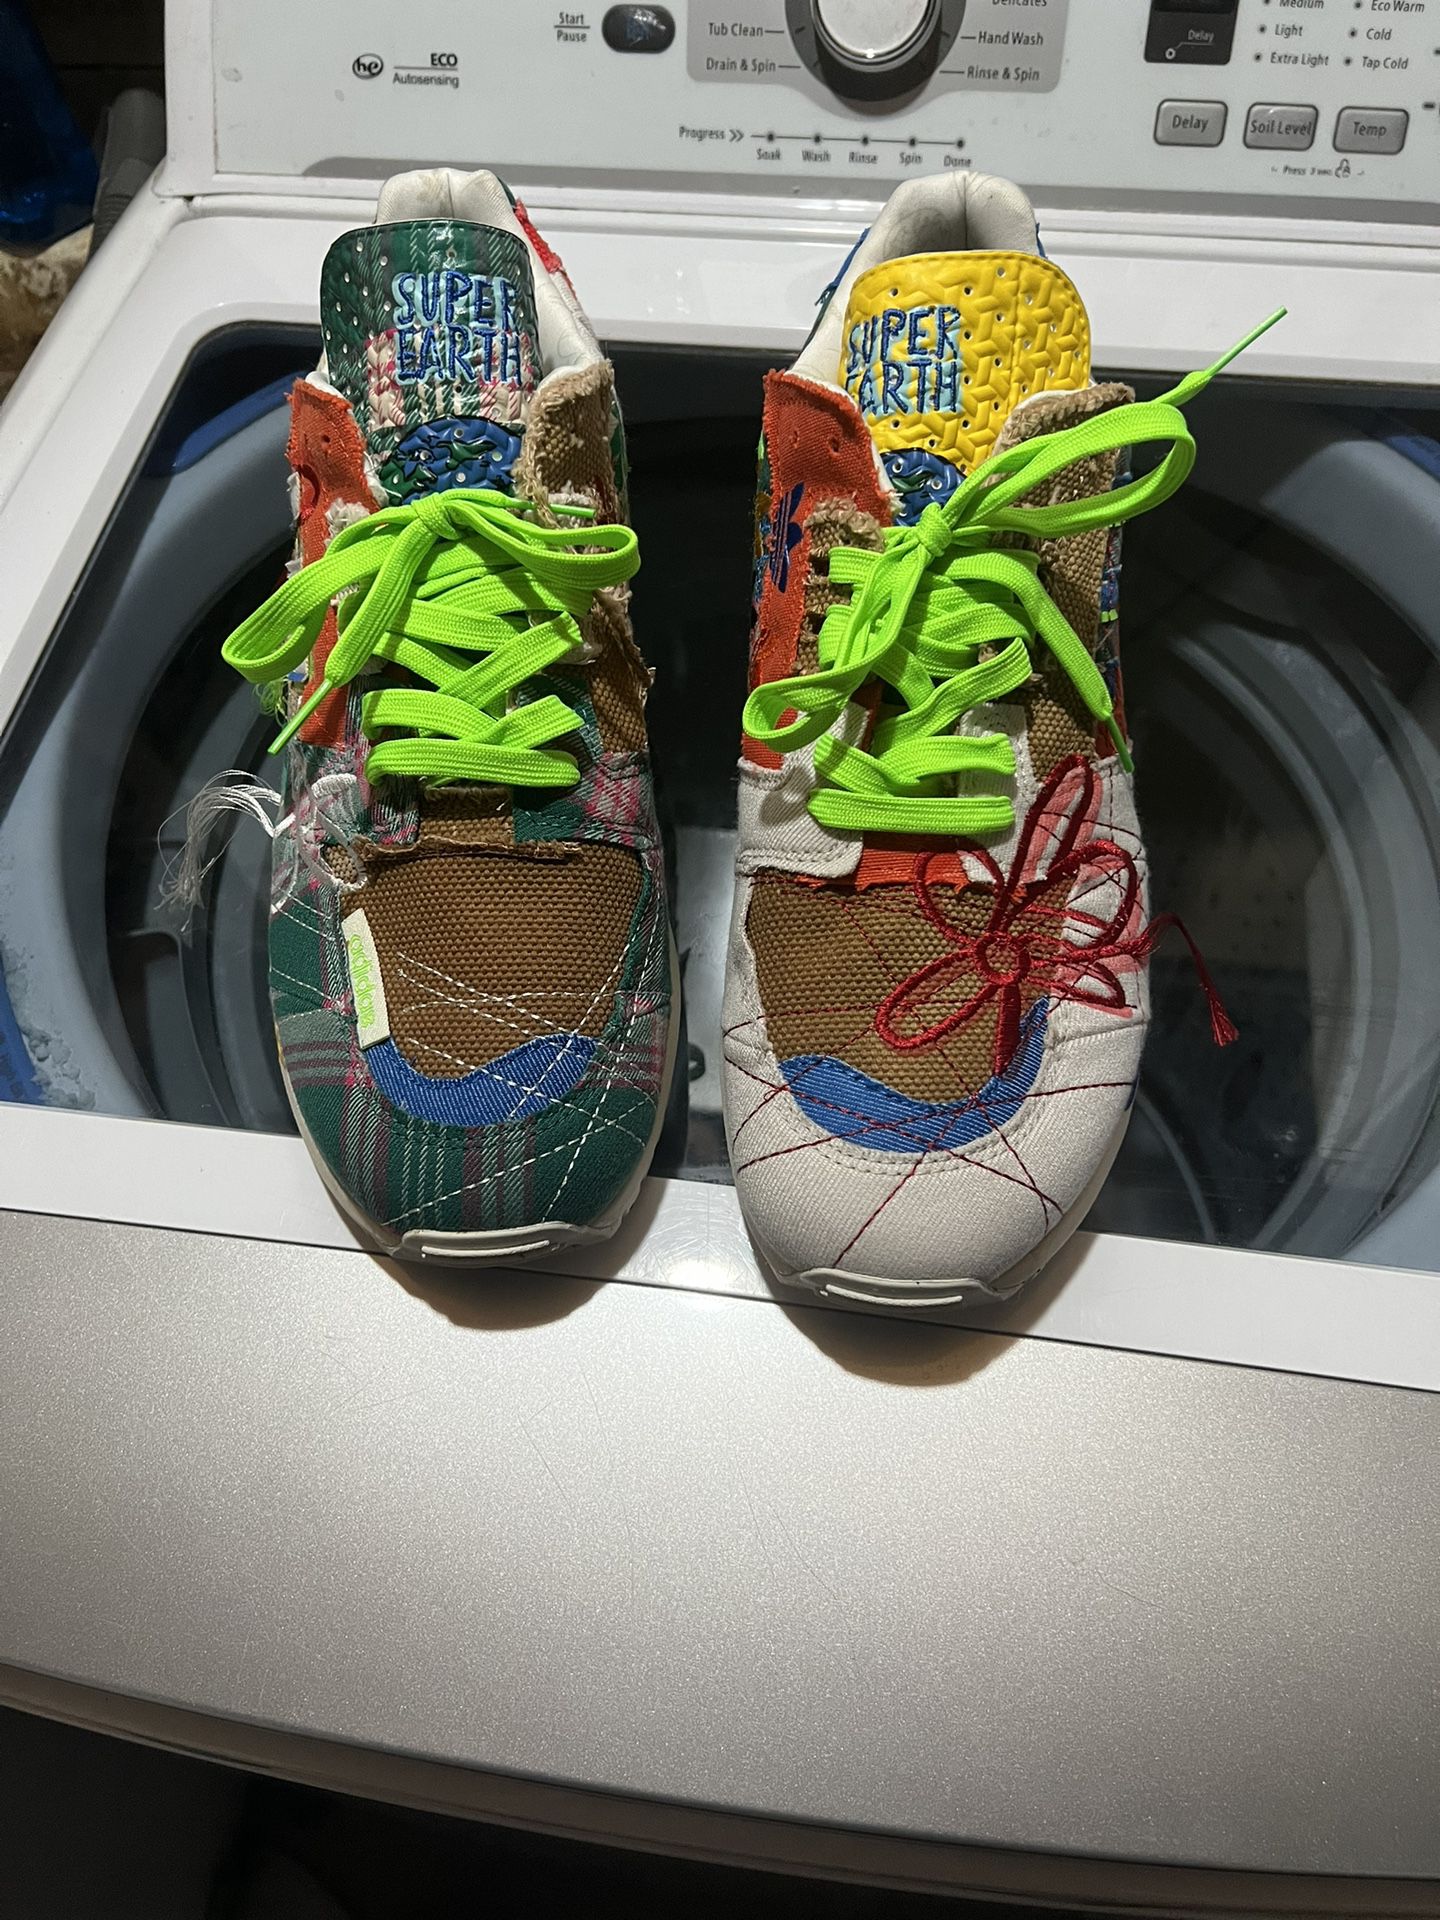 Adidas ZX 8000 X Wotherspoon Super Earth for Sale in Staten Island, NY -